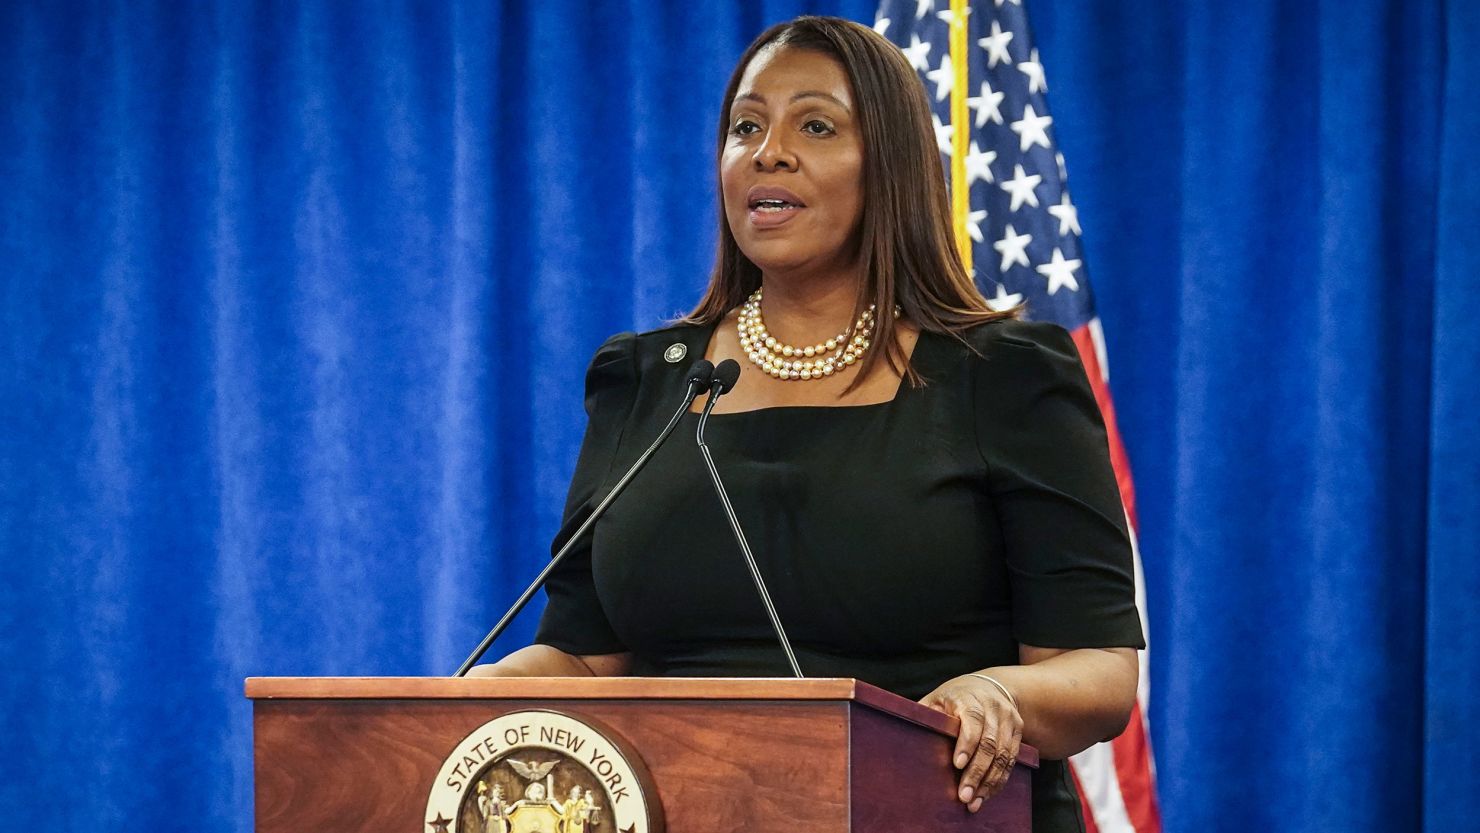 New York Attorney General Letitia James accused nearly a dozen pregnancy centers of fraud, deceptive business practices, and false advertising.